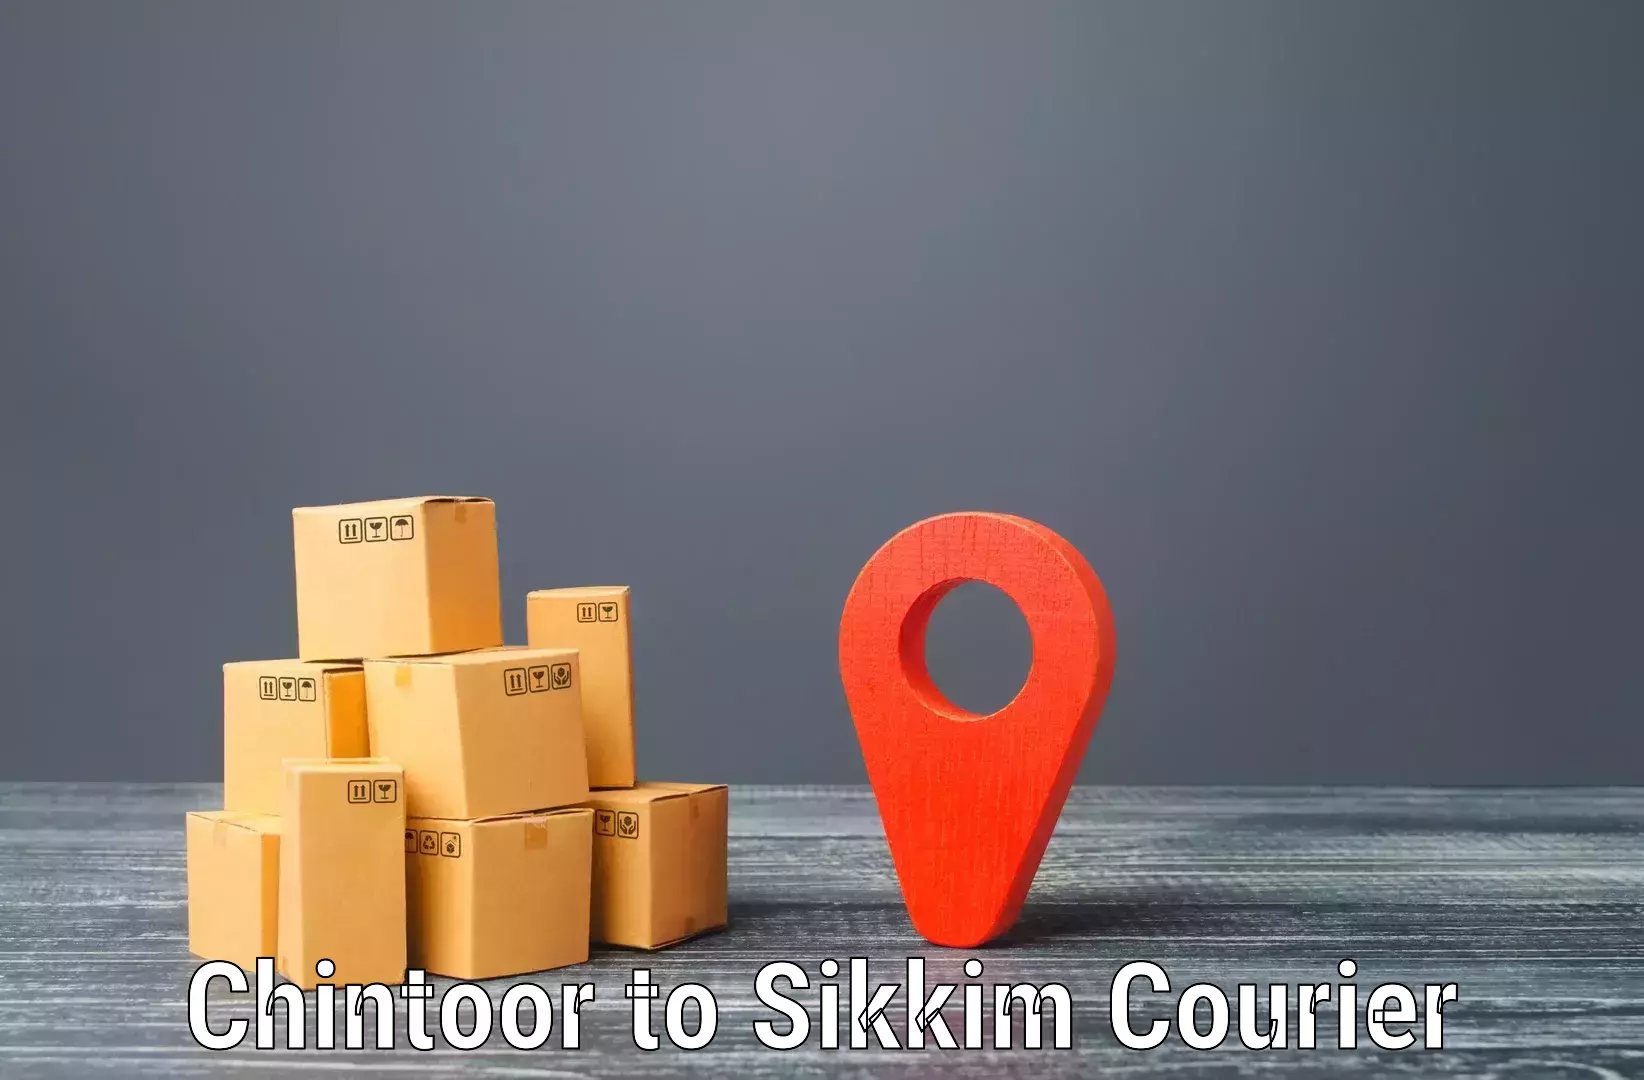 Discounted shipping Chintoor to Pelling